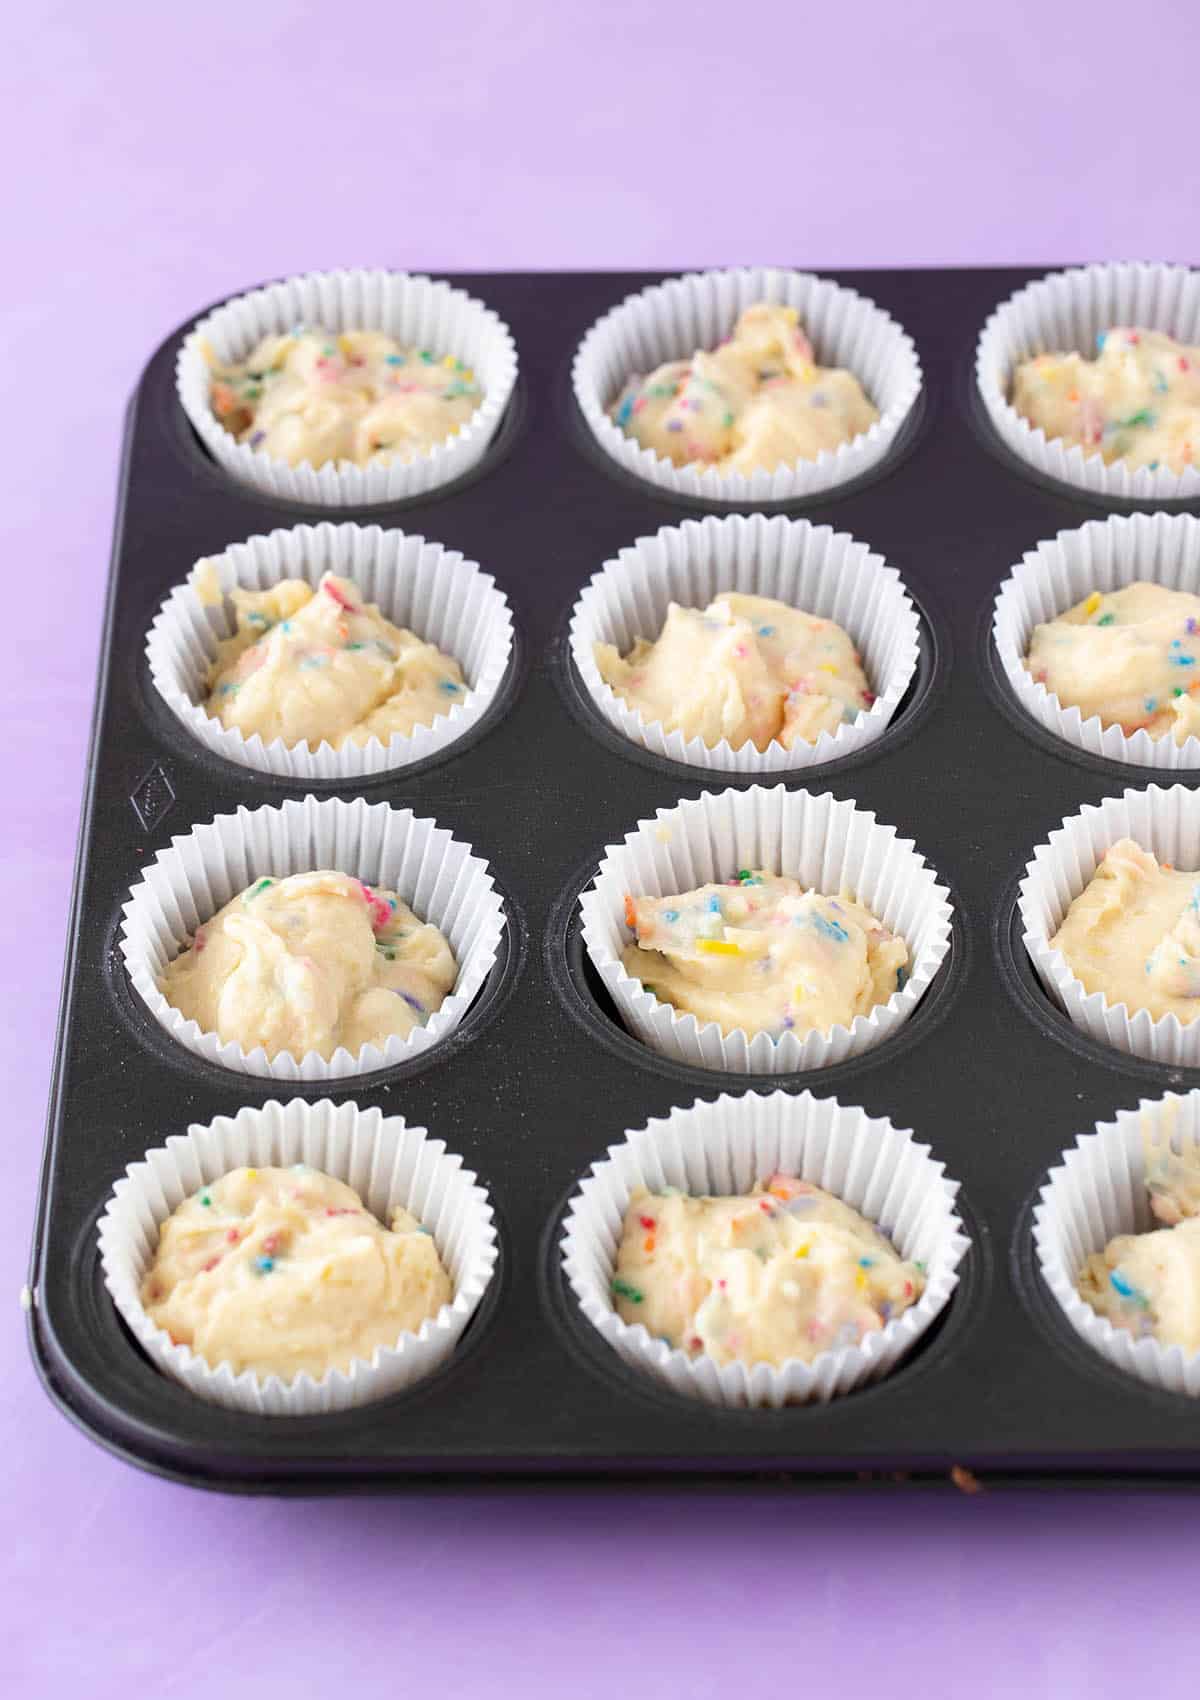 A muffin pan filled with funfetti cake batter.